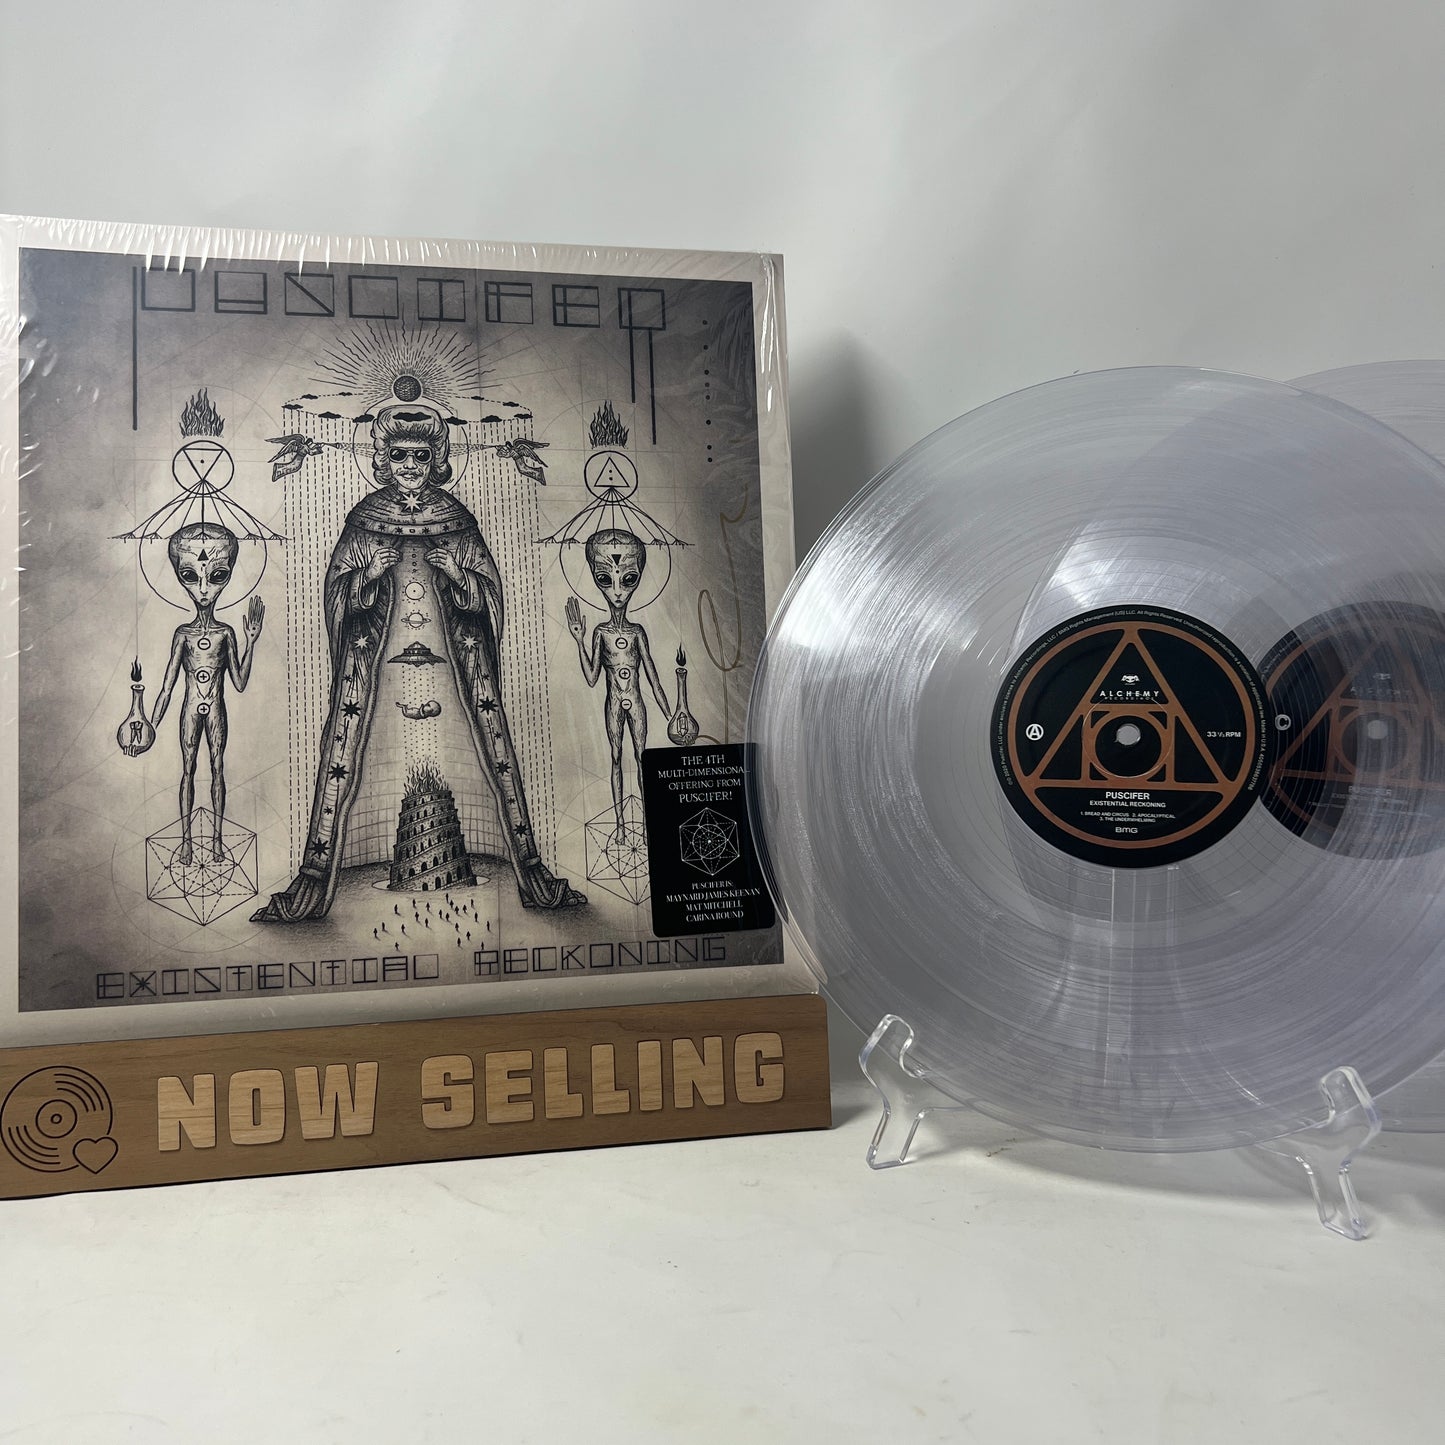 Puscifer - Existential Reckoning Vinyl LP Clear Signed by Carina Round